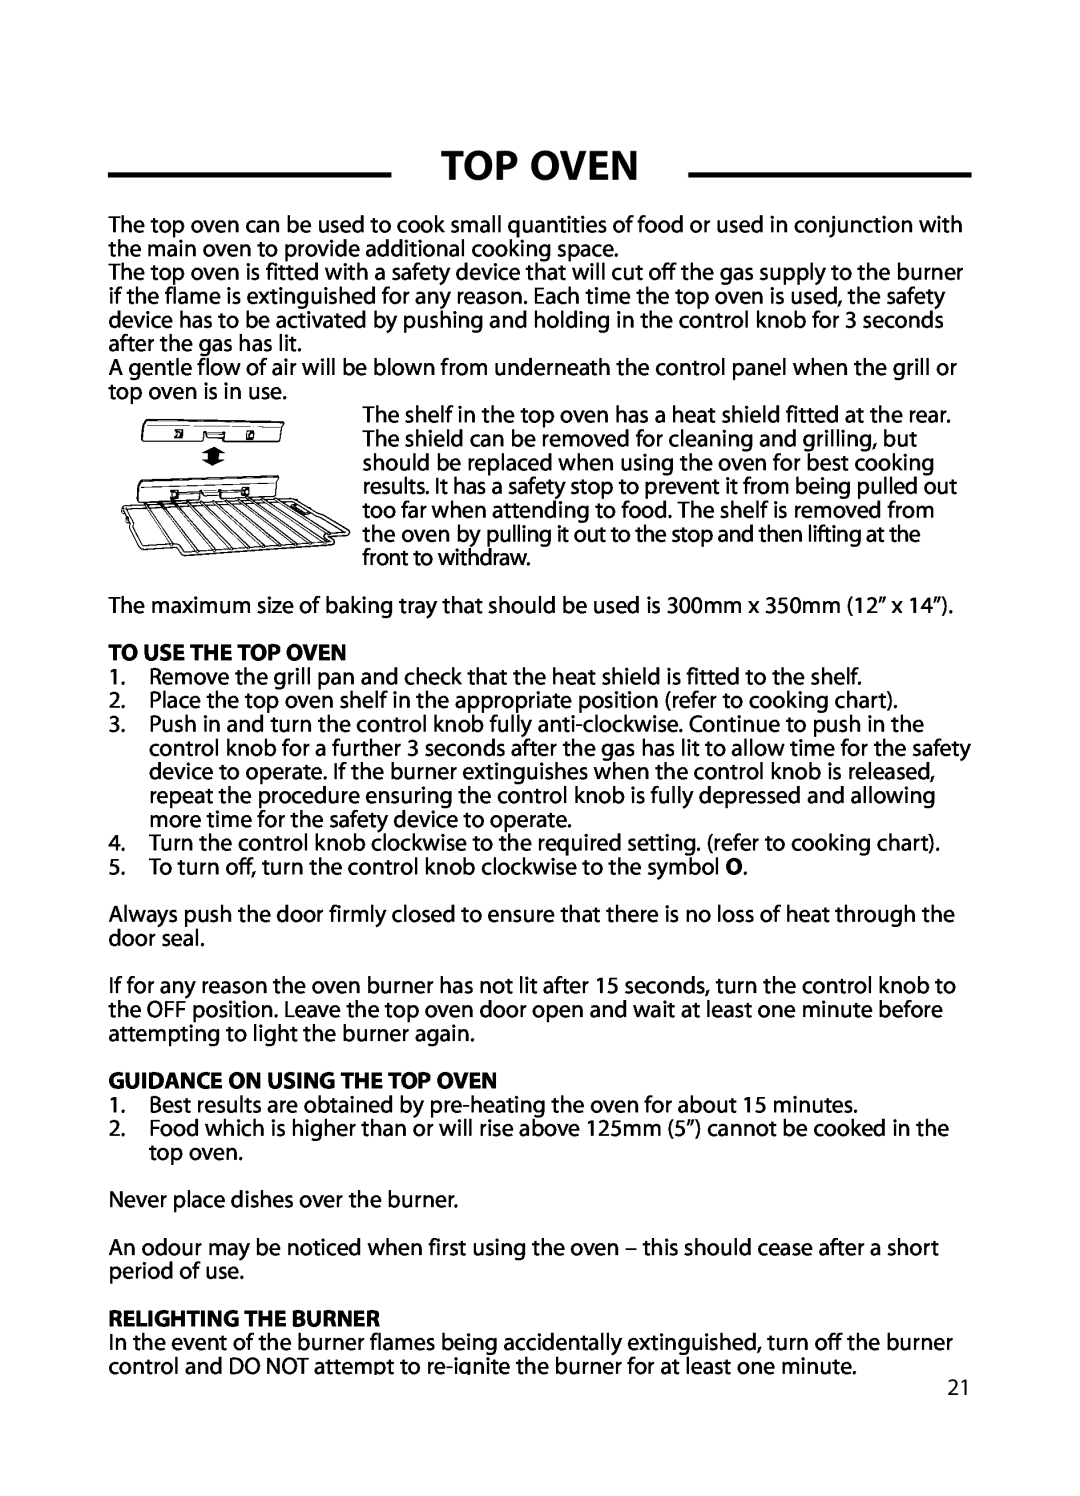 Cannon C60GC, C60GT installation instructions To Use The Top Oven, Guidance On Using The Top Oven, Relighting The Burner 